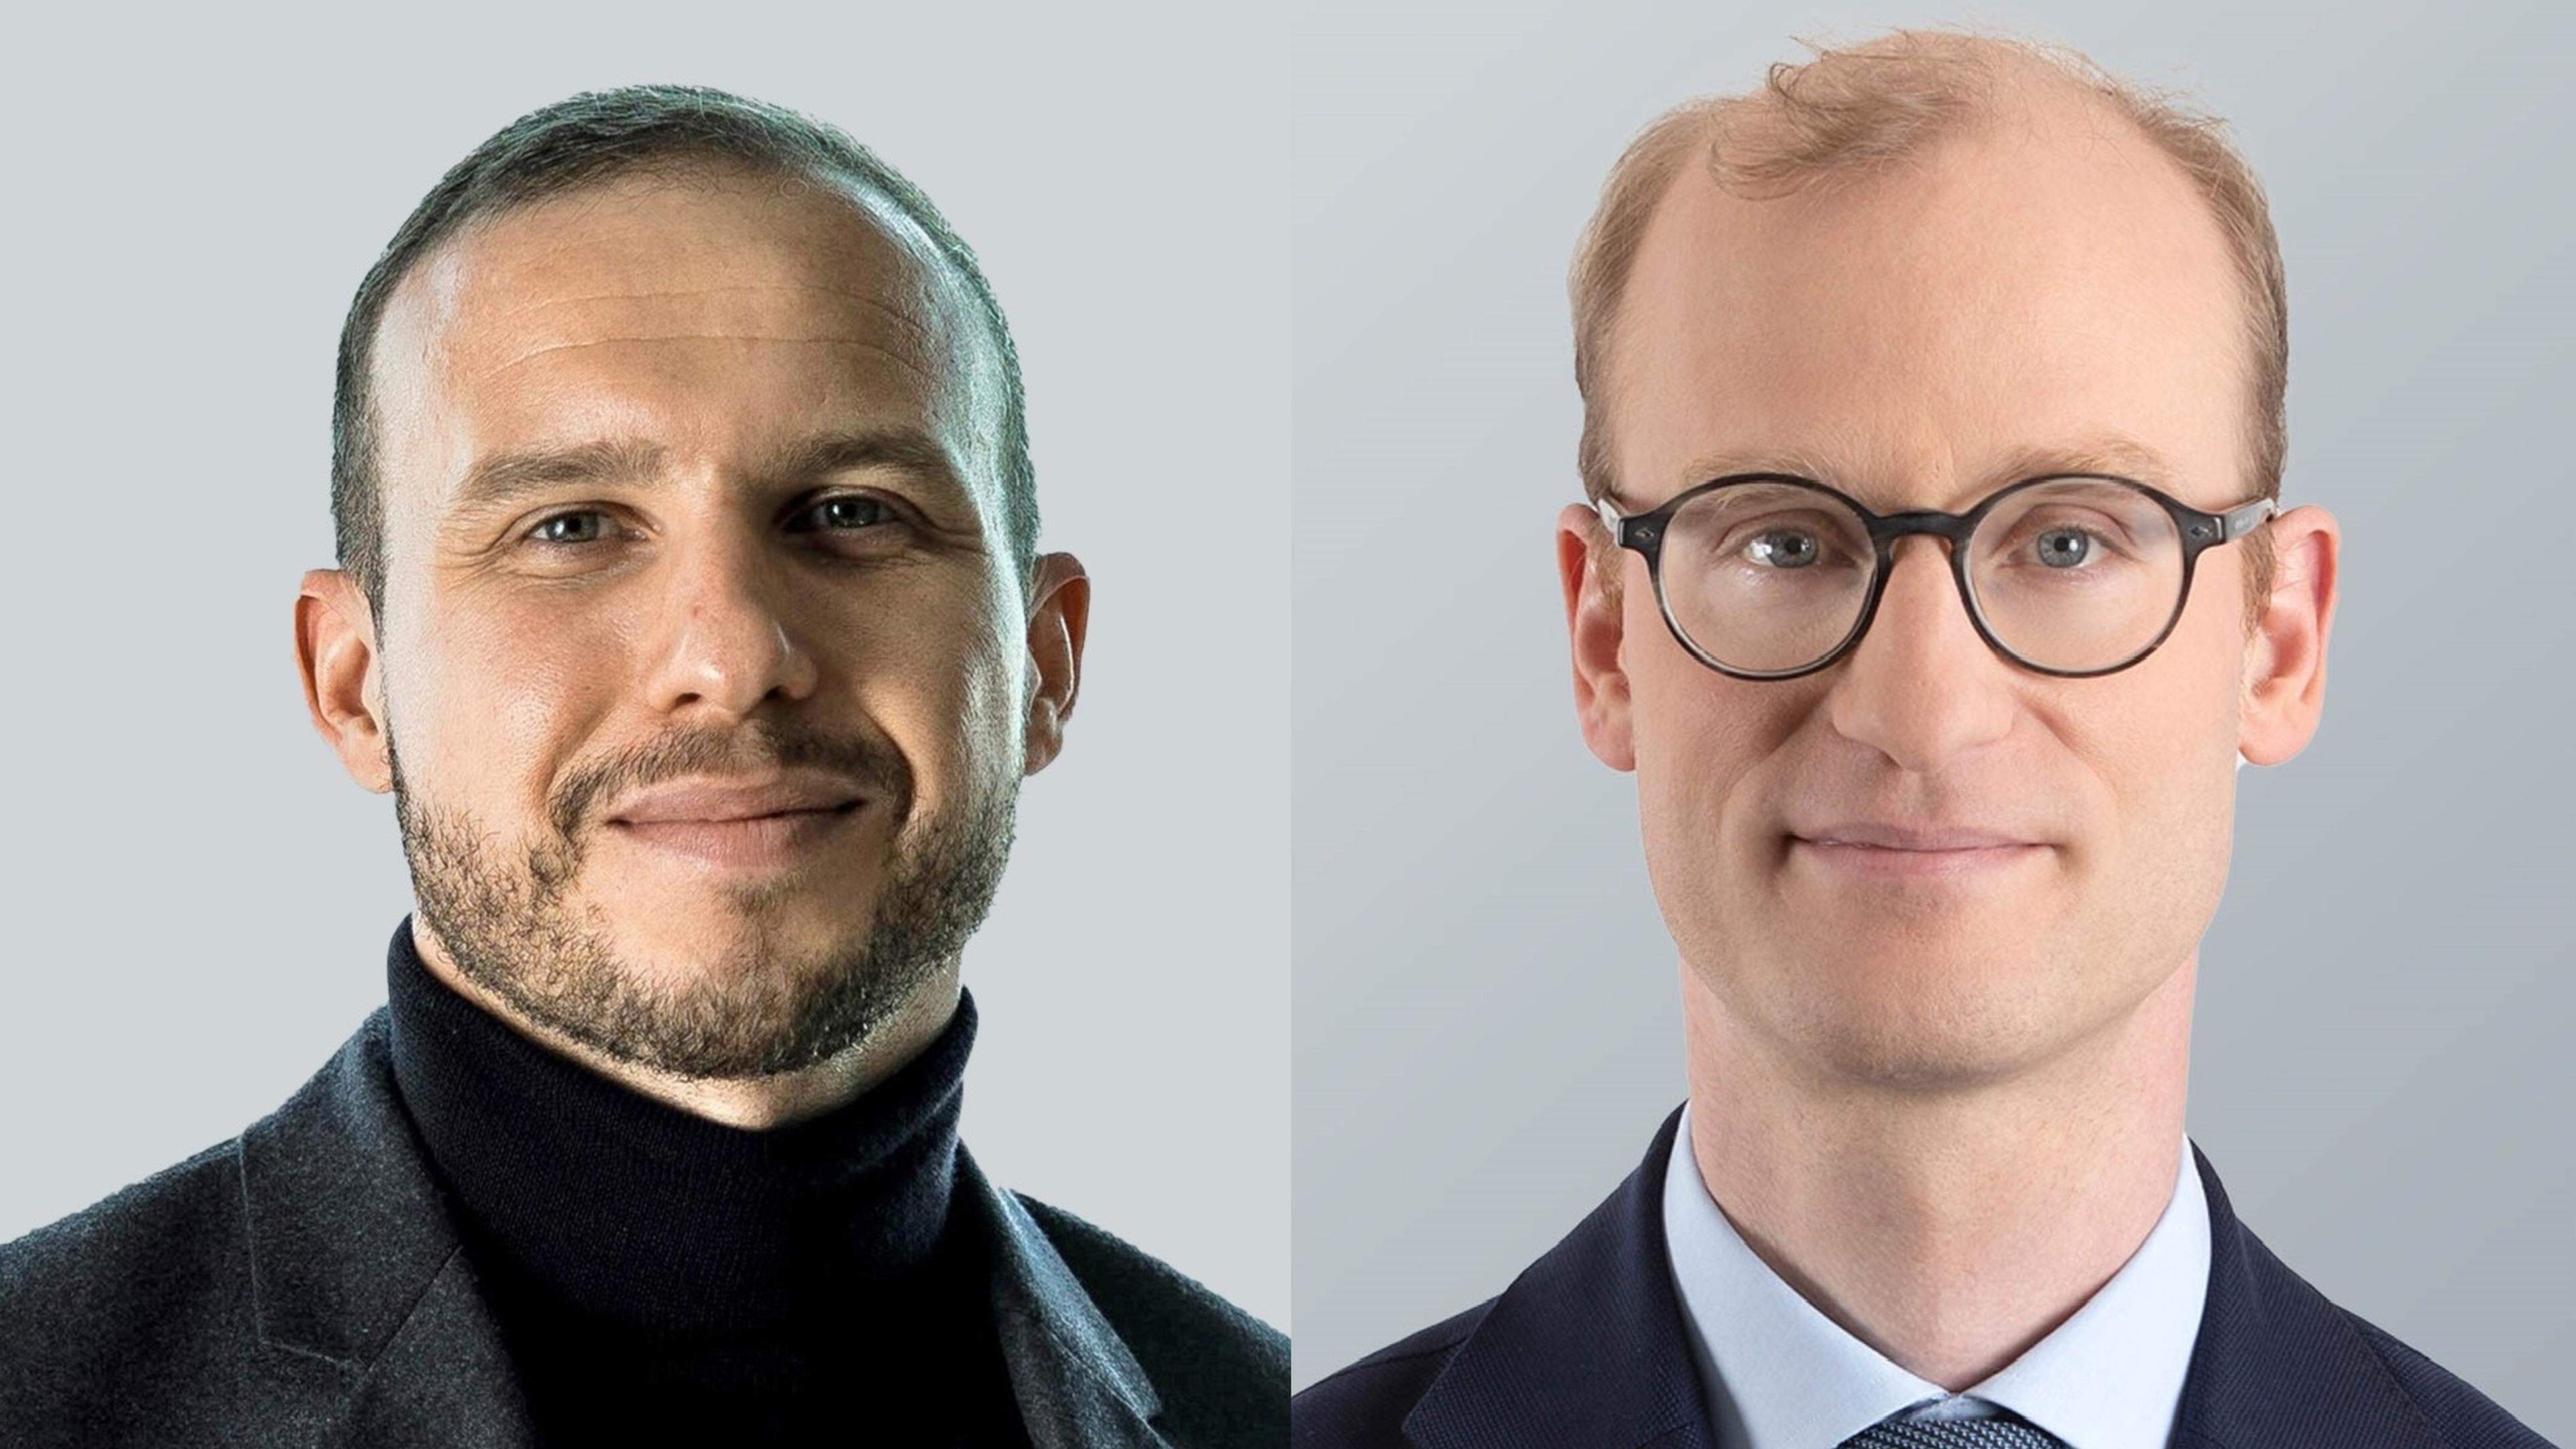 Baptiste Aubry (l.) and Franz Kerger (r.) were promoted to partner roles ahead of the partnership between law firms A&O and Shearman & Sterling